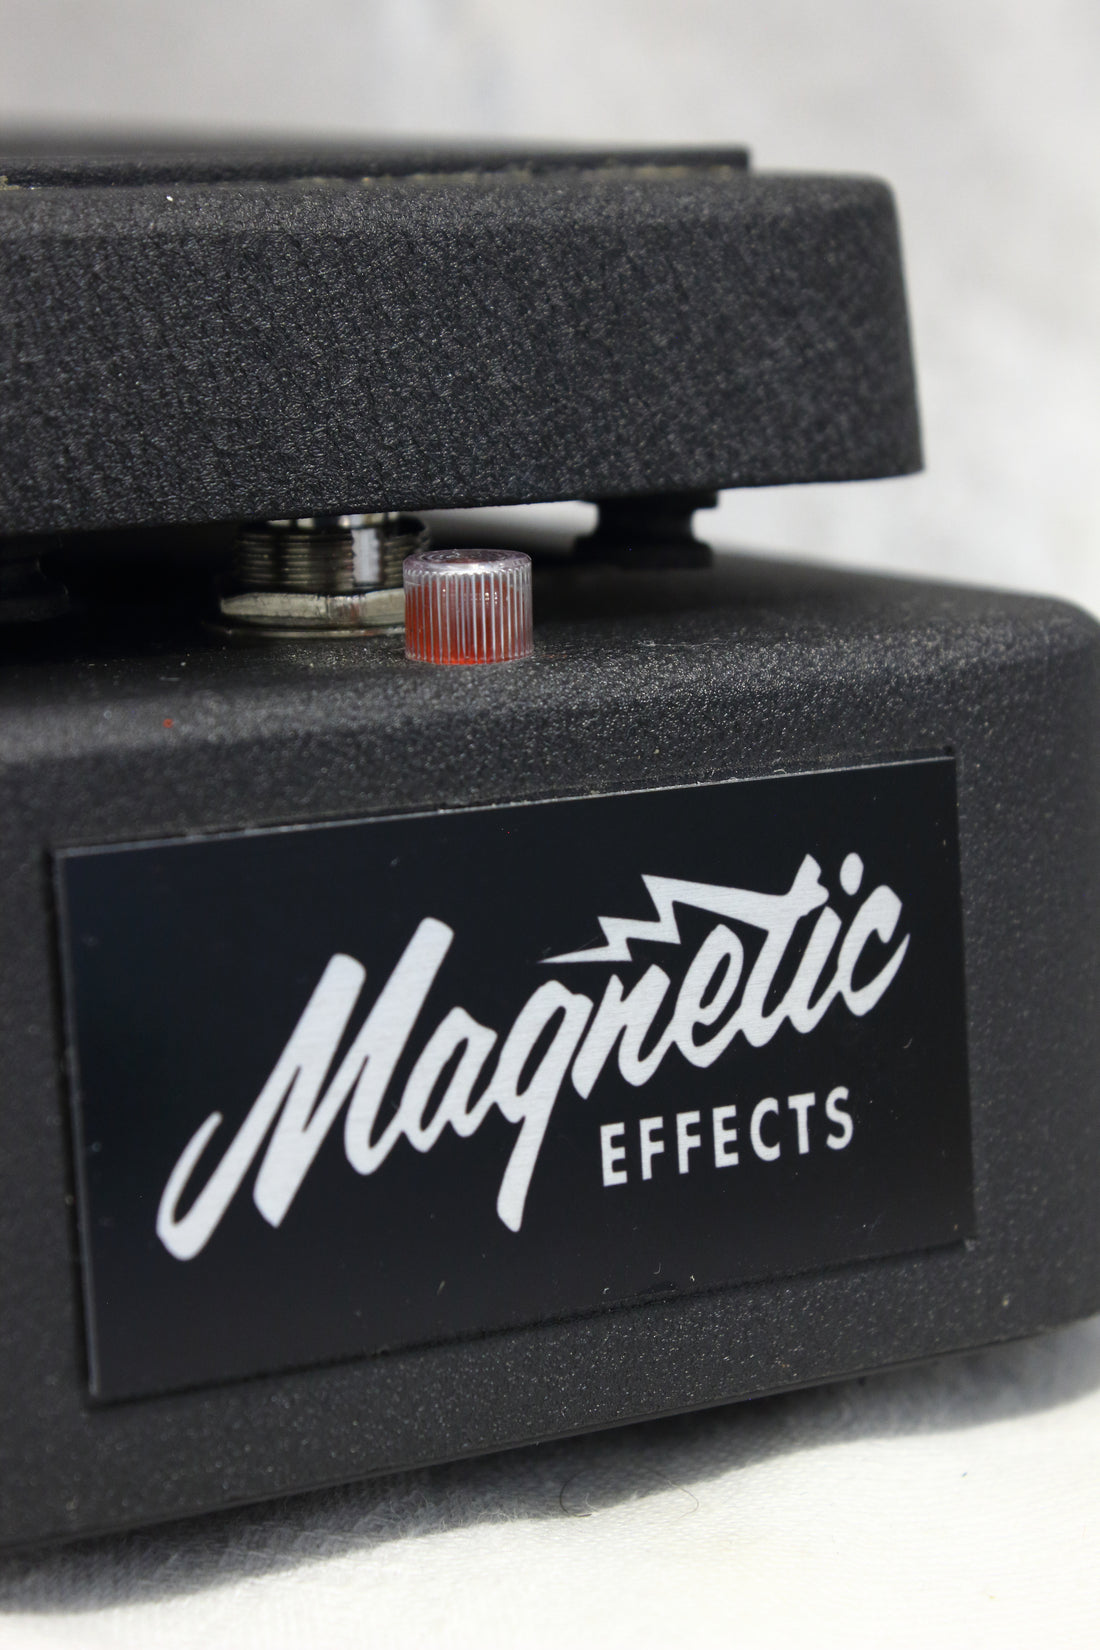 Magnetic Effects Fuzz Wah Pedal